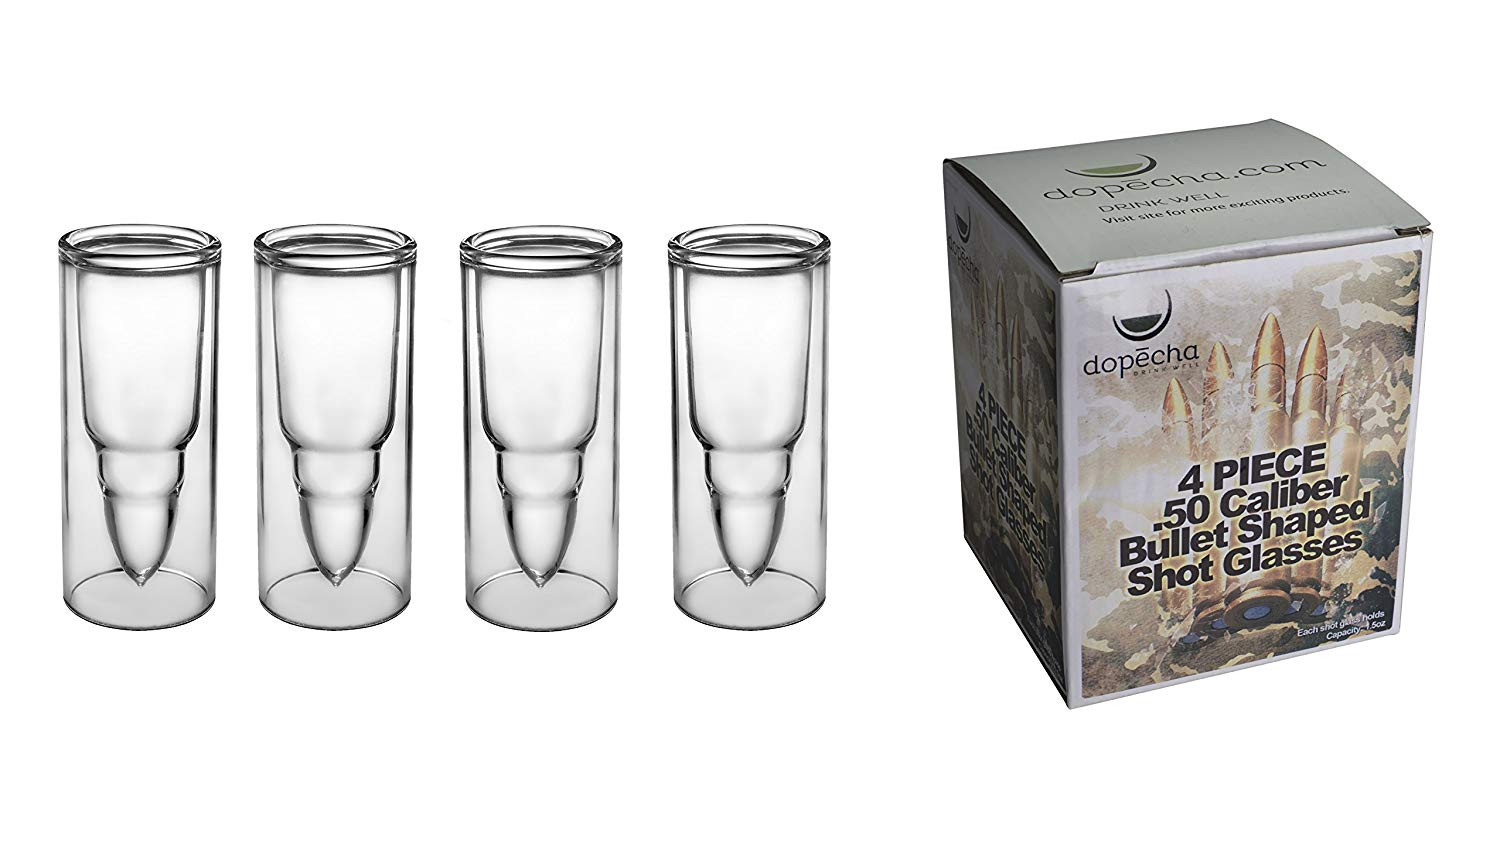 19 Stylish 3 Tiered Cylinder Vases 2024 free download 3 tiered cylinder vases of amazon com 50 caliber bullet shaped shot glasses 4 pack durable with regard to amazon com 50 caliber bullet shaped shot glasses 4 pack durable dual layered 1 5 oz 